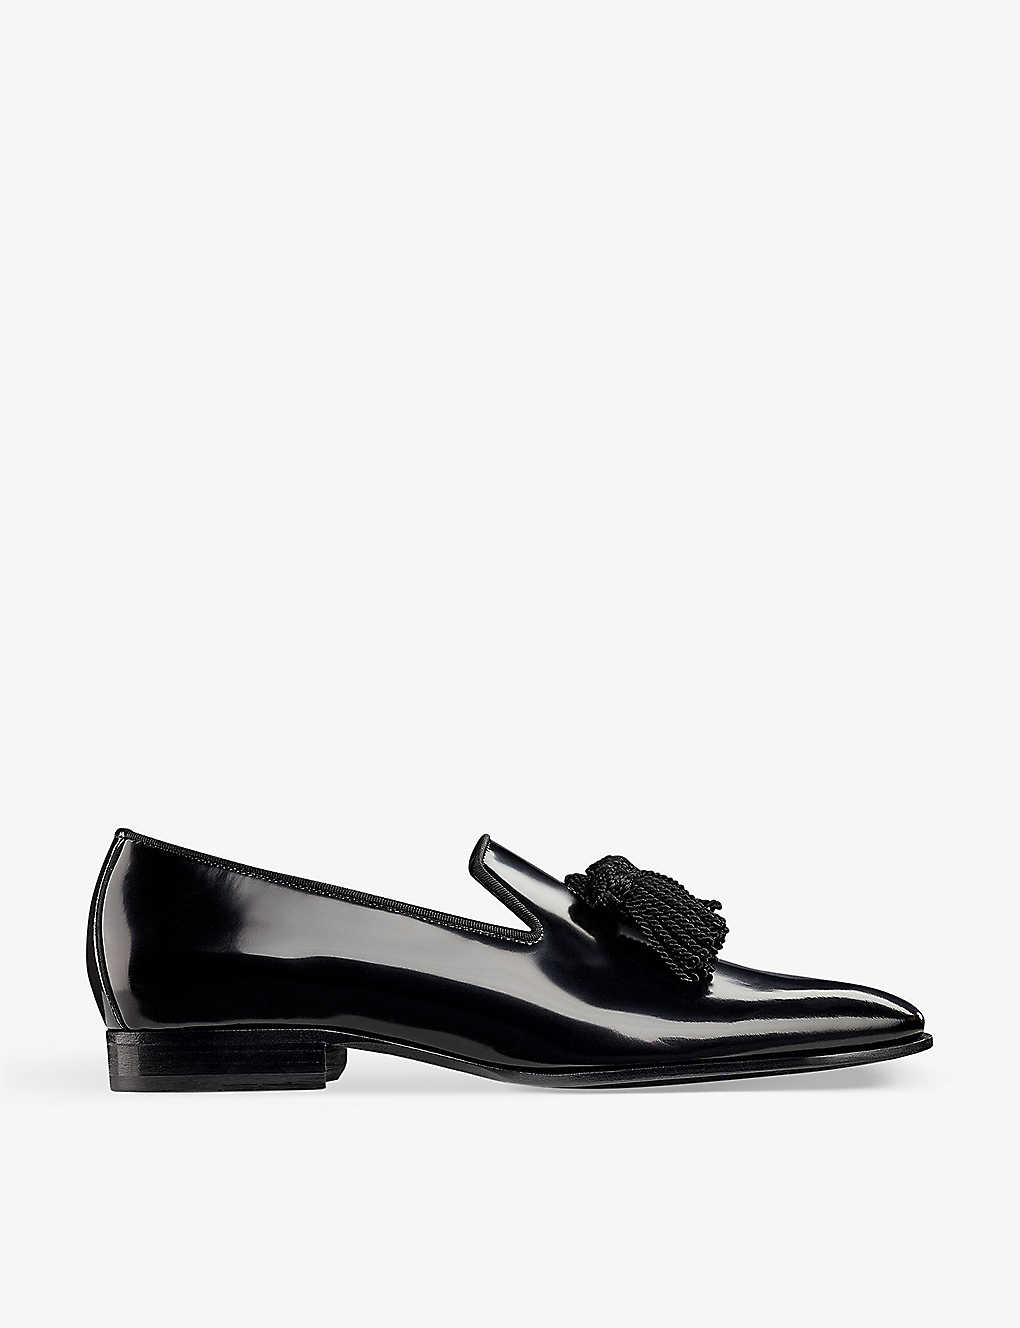 Shop Jimmy Choo Womens Black Foxley Tassel Patent-leather Loafers